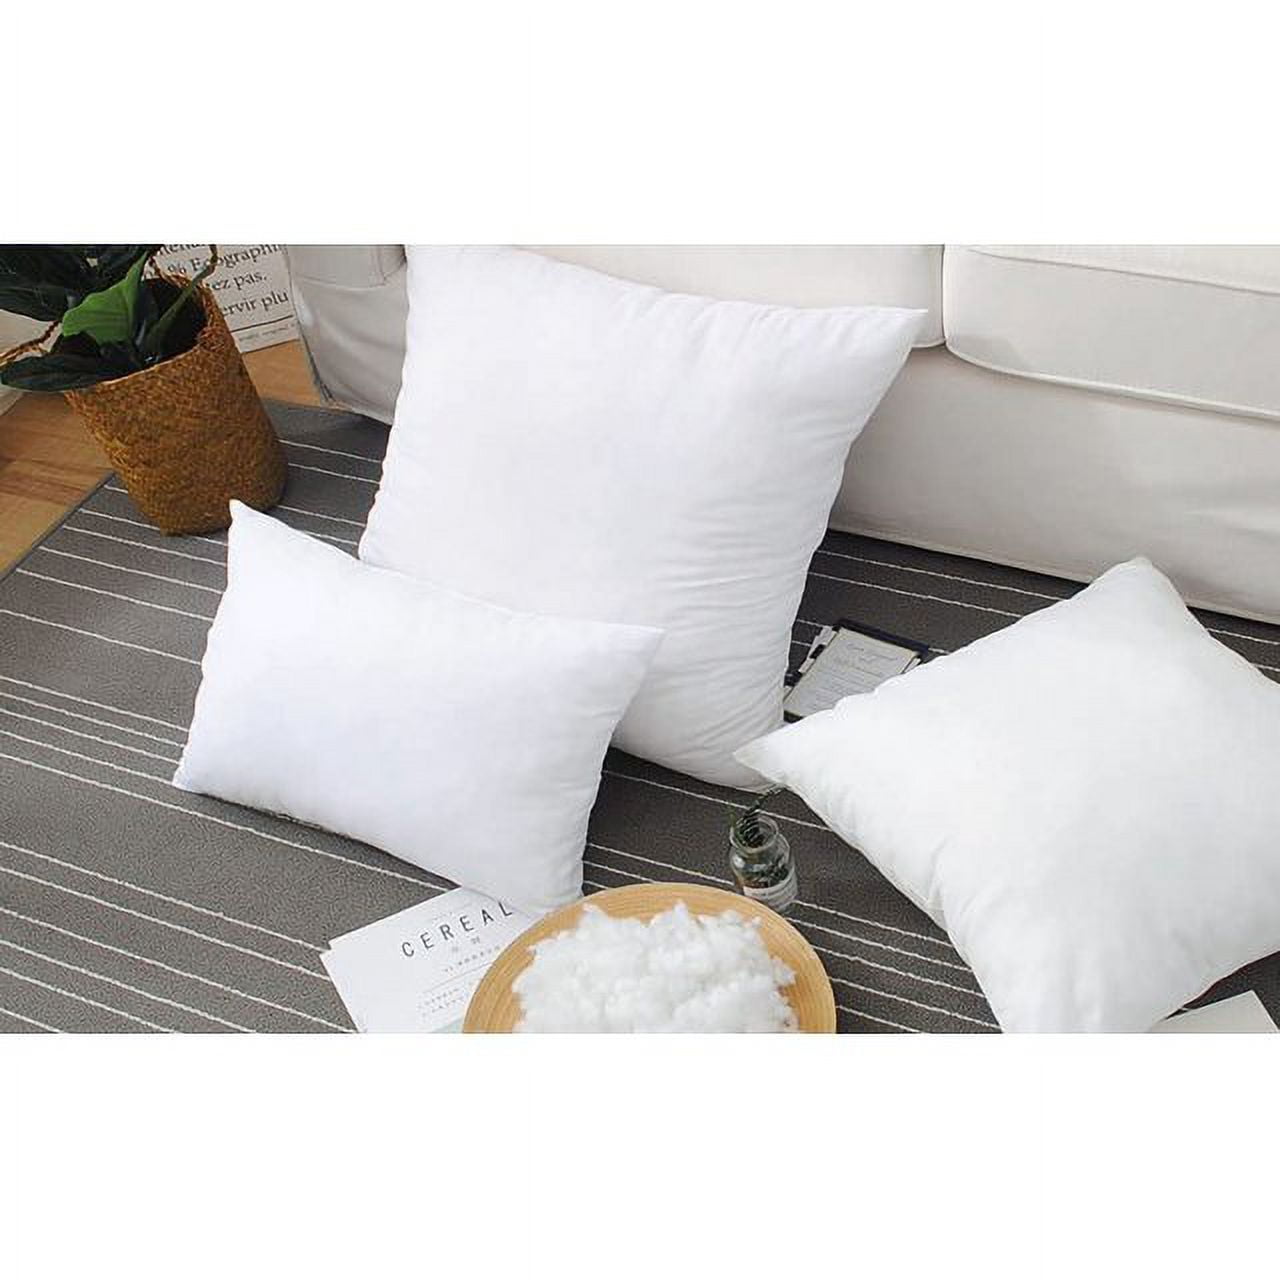 Ohok Throw Pillow Inserts 18 x 18 Inches Pack of 4 Square Cushion Inner  Soft Fluffy Plump Stuffer Cushion Pads White Decorative Pillow Inserts  (White)